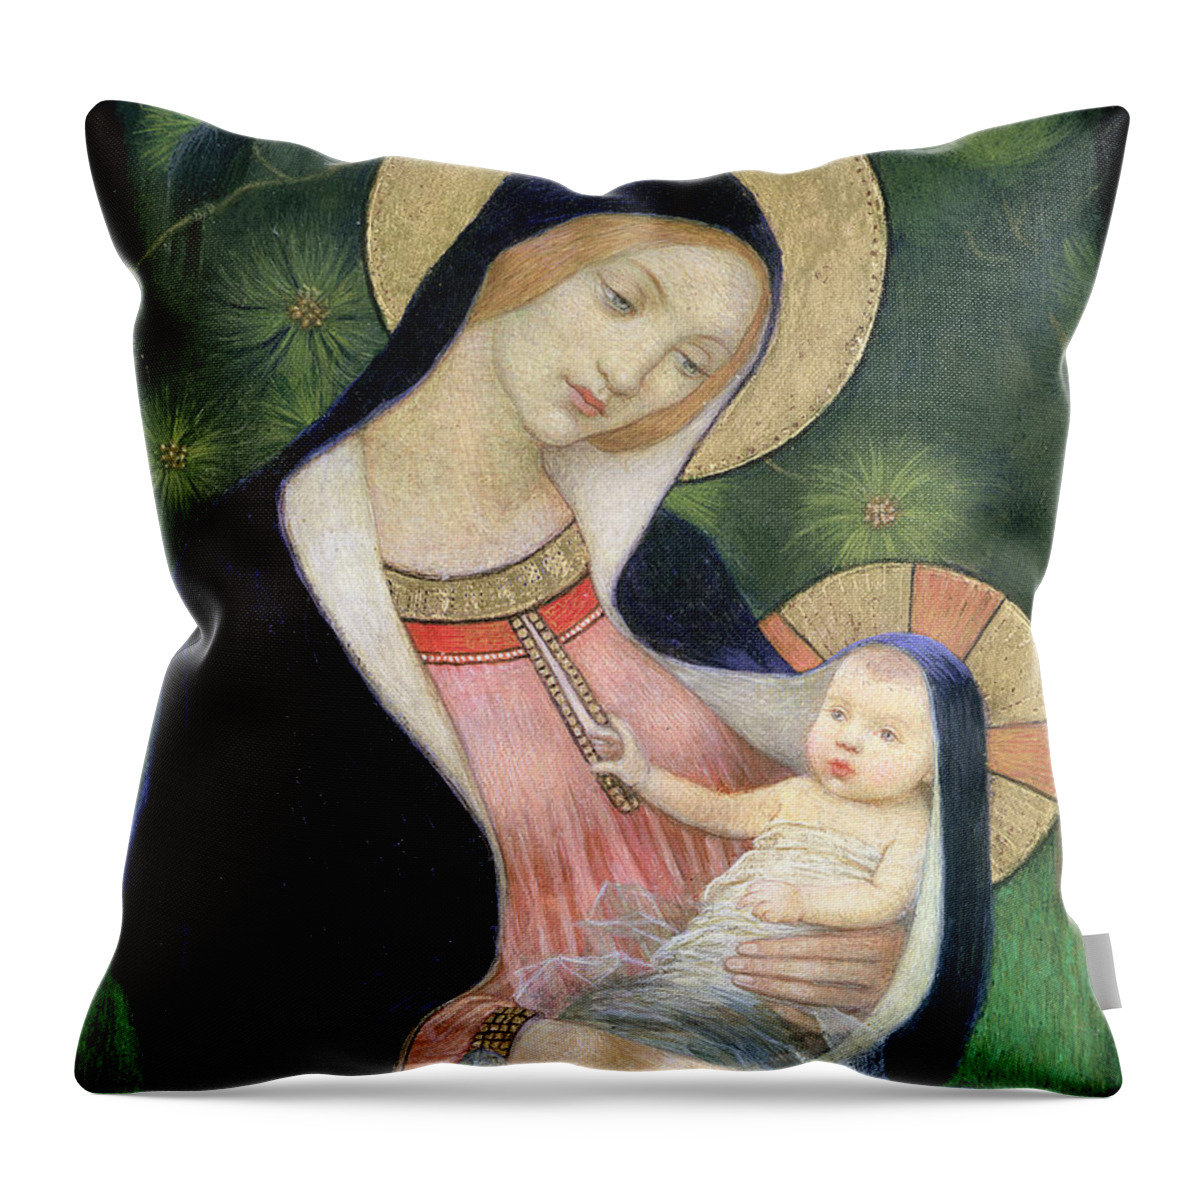 Madonna Of The Fir Tree Throw Pillow featuring the painting Madonna of the Fir Tree by Marianne Stokes